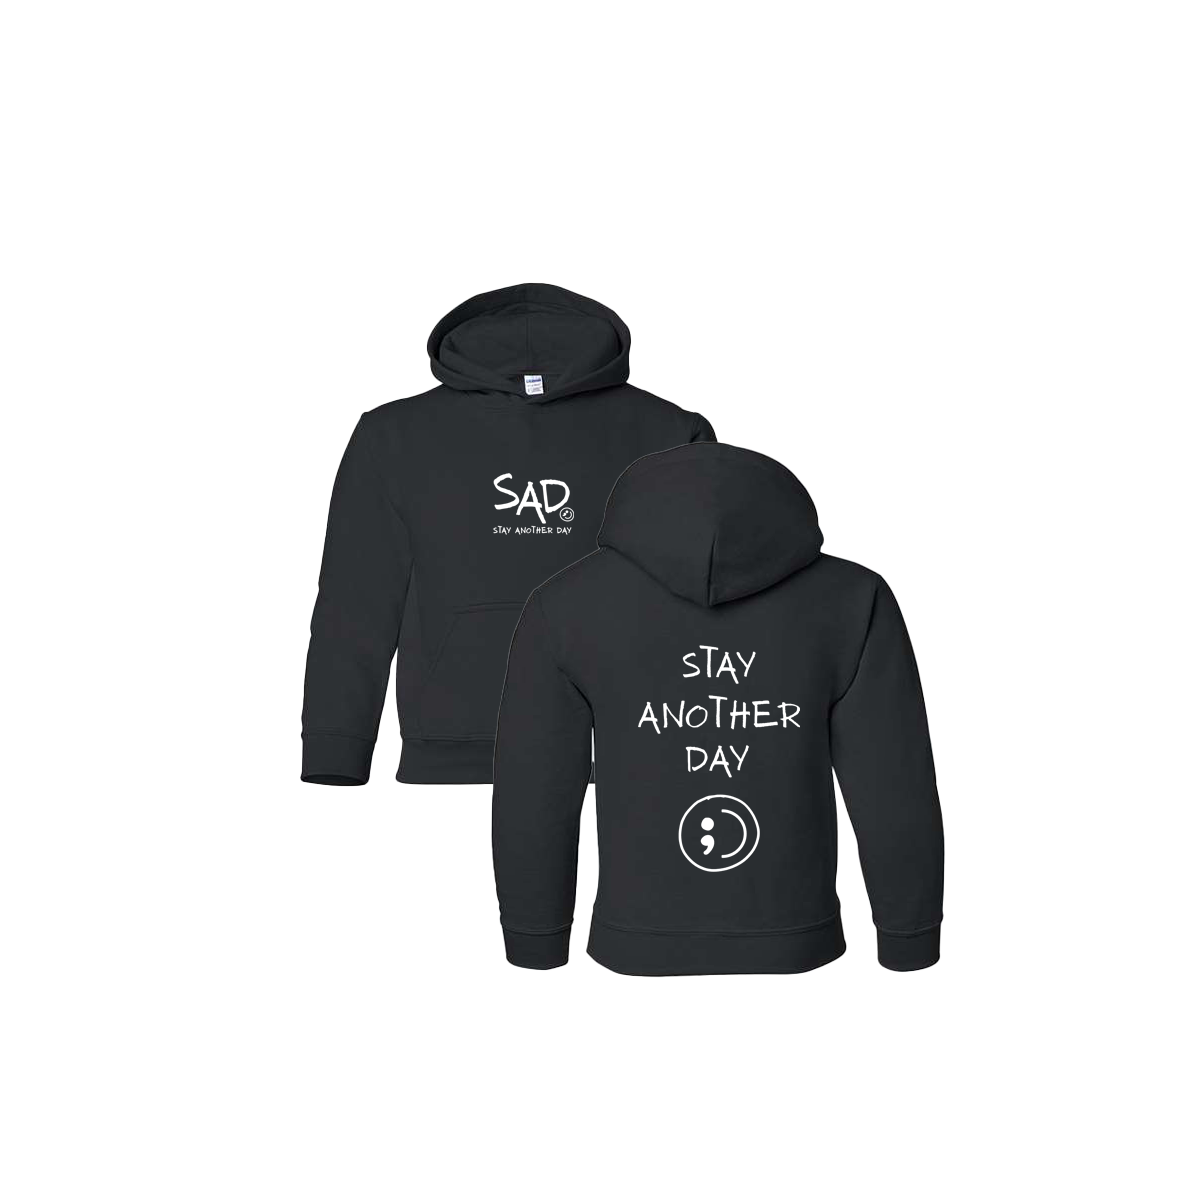 Stay Another Day Screen Printed Black Youth Hoodie